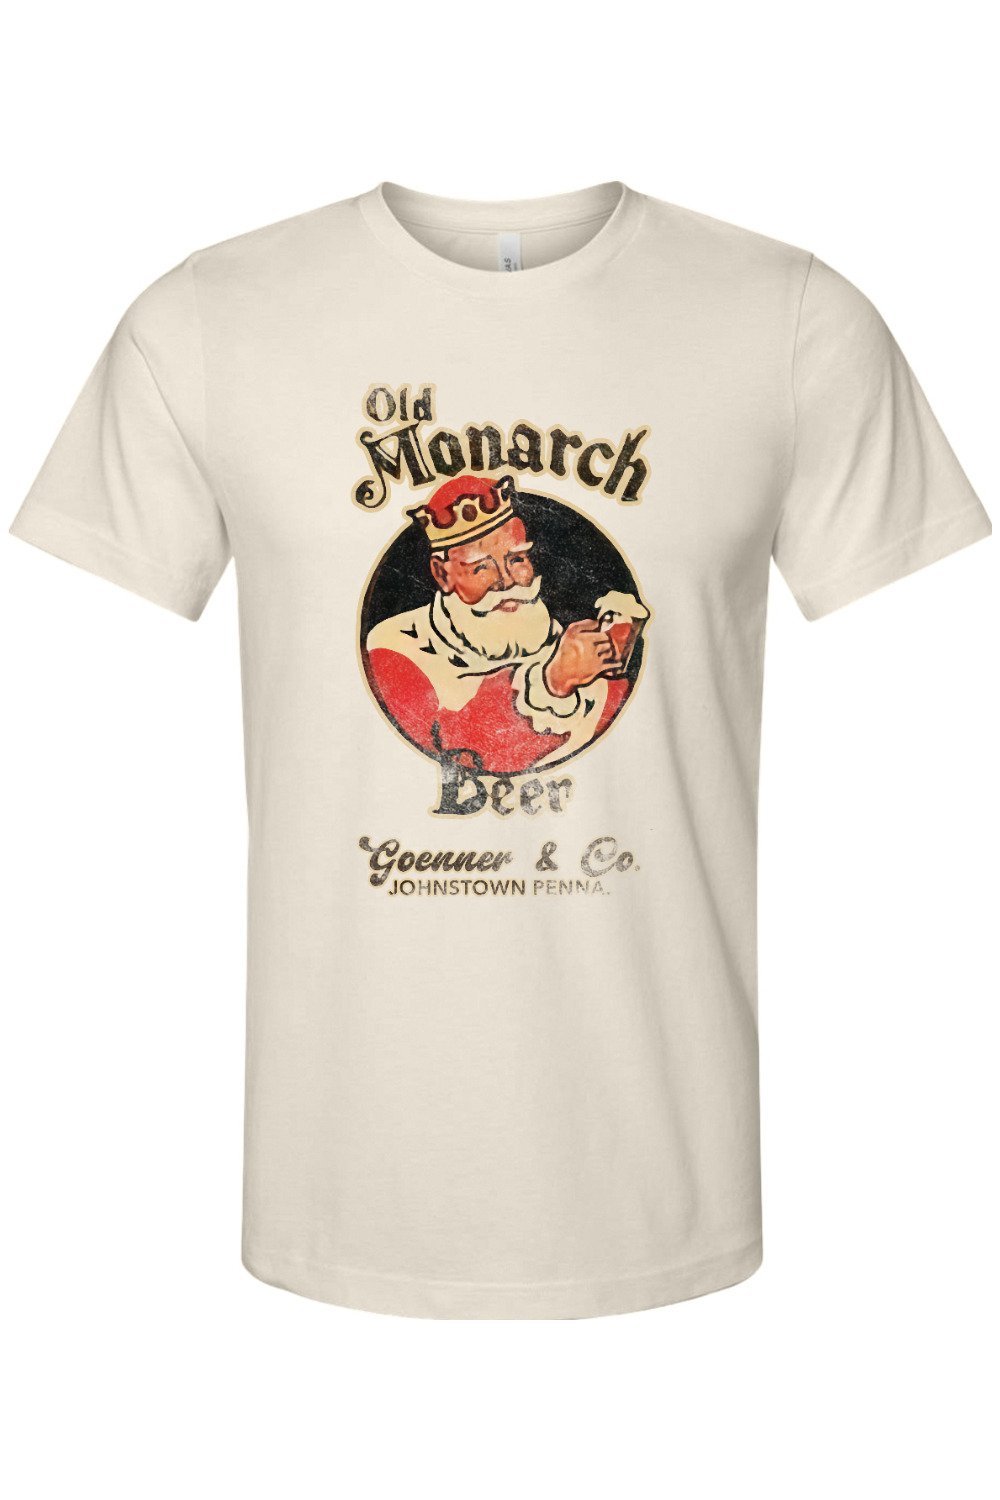 Old Monarch Beer - Johnstown, PA - Yinzylvania